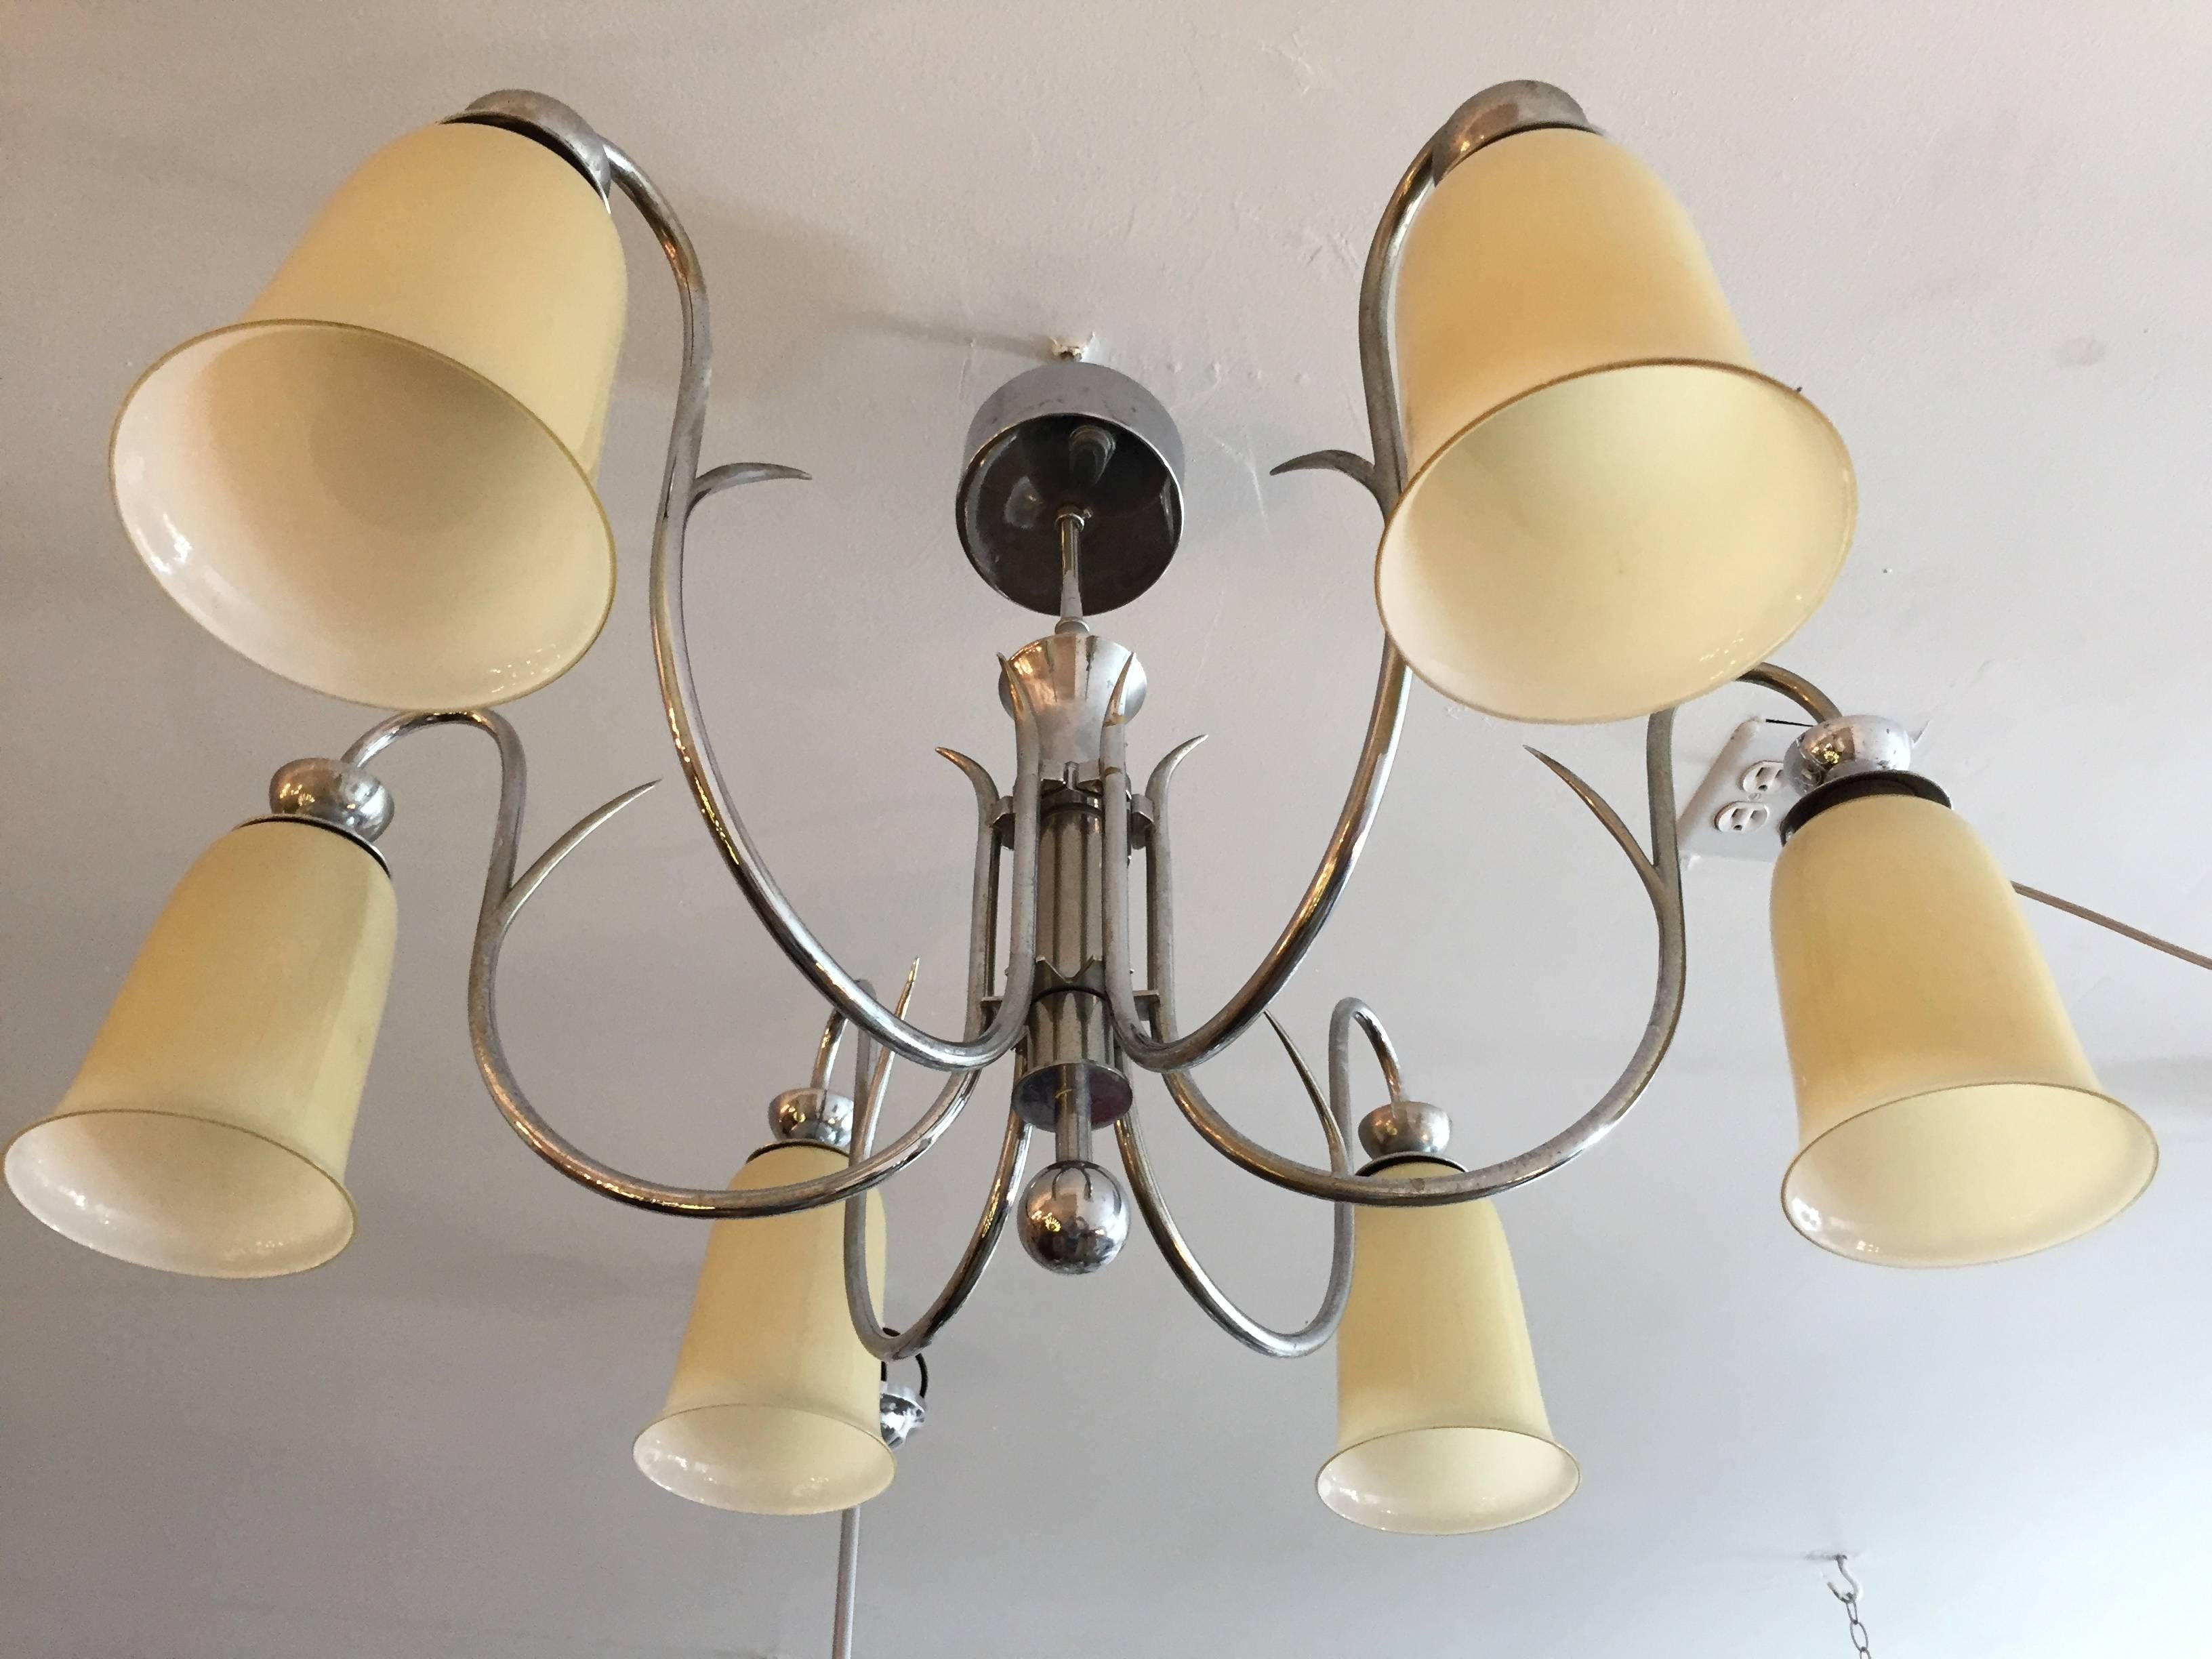 A wonderful 1920s Austrian Art Deco chandelier or flush ceiling light composed of a chrome body and custard glass shades. It has nice sweeping arms with decorative vine and ball elements. Newly rewired.